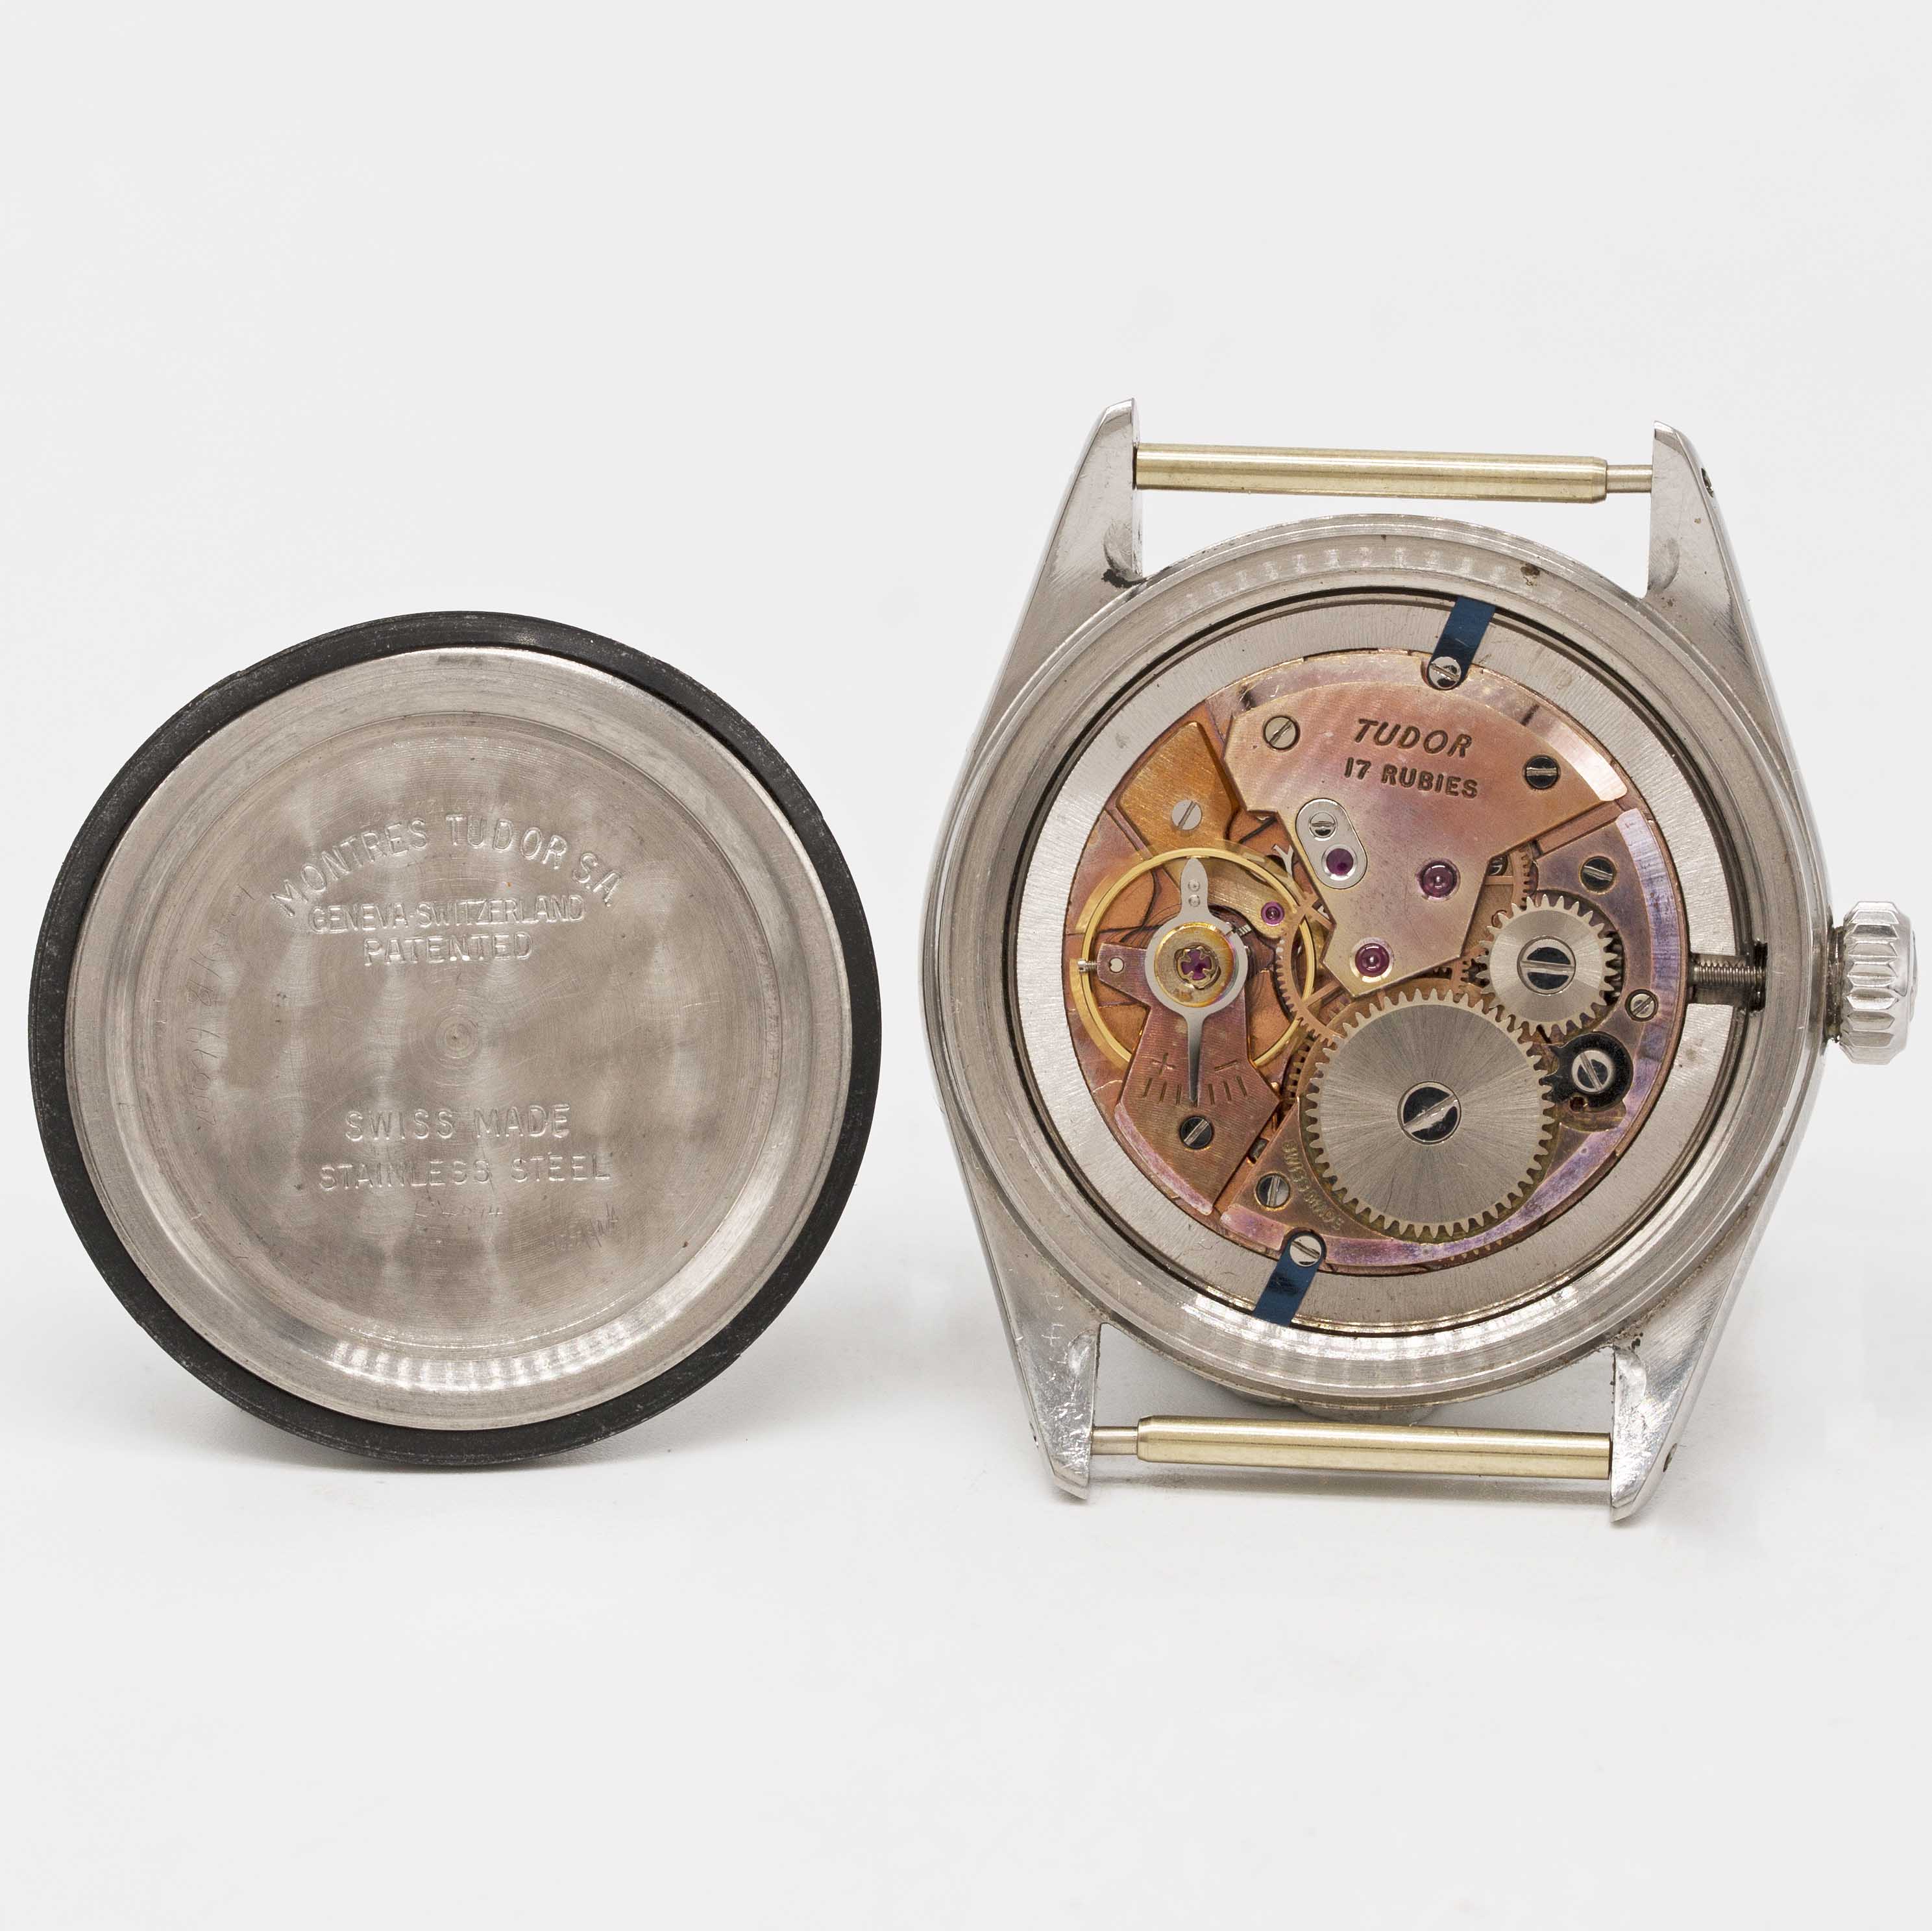 A GENTLEMAN'S STAINLESS STEEL ROLEX TUDOR OYSTER ROYAL WRIST WATCH CIRCA 1958, REF. 7934 WITH - Image 4 of 4